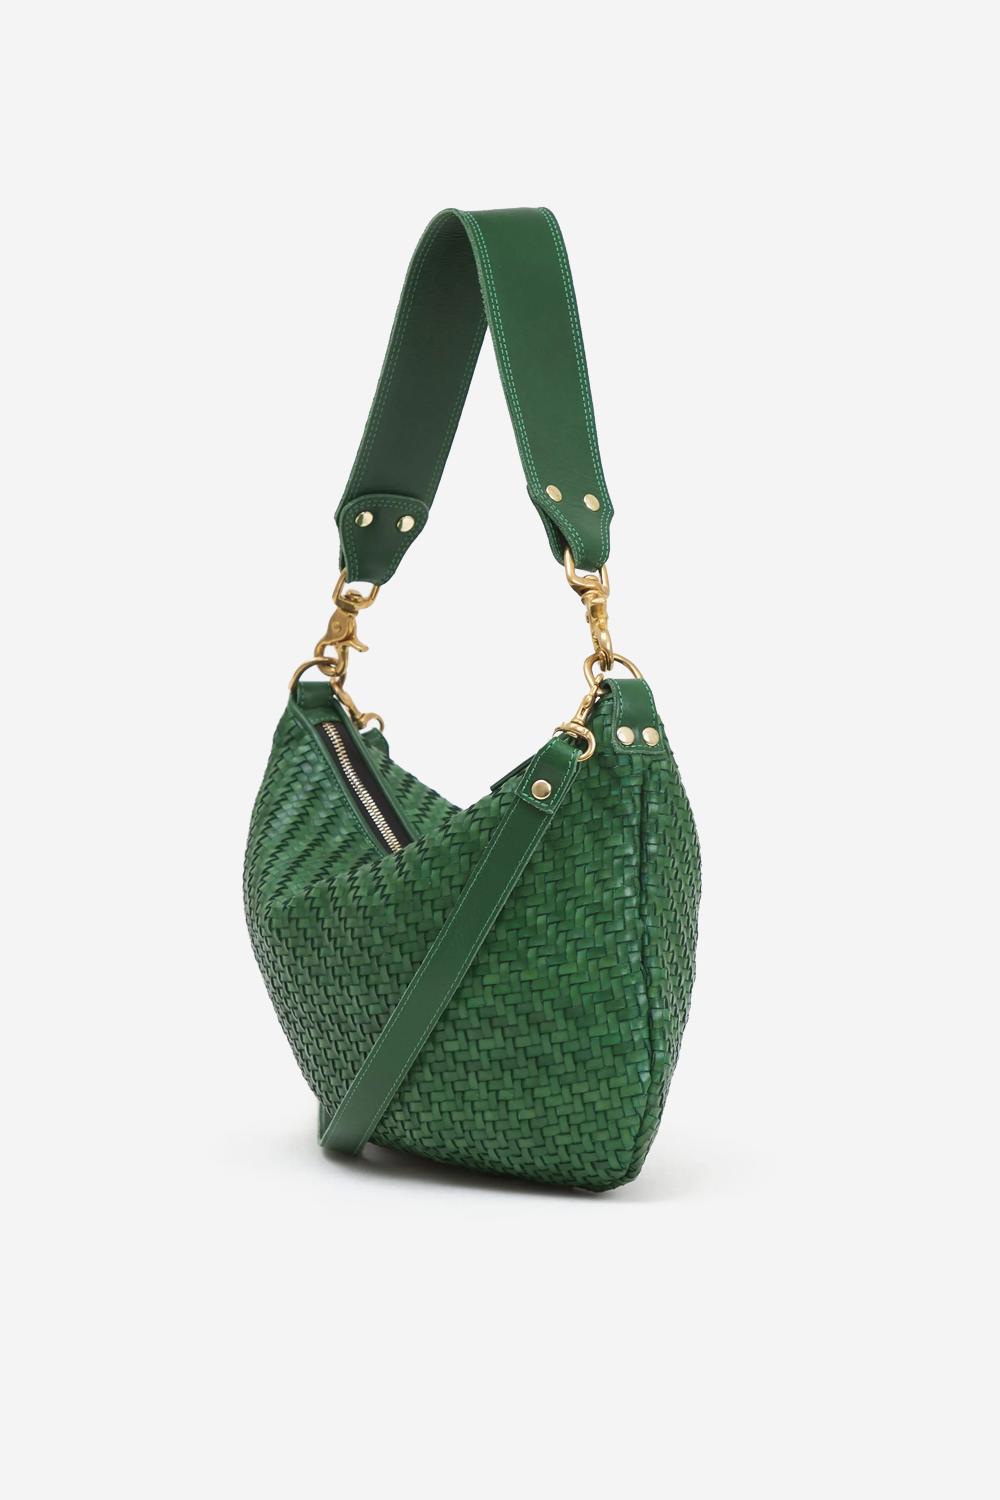 Womens Clare V. Petit Henri Pouch Green  Clare V. Bags & Small Accessories  - AICelluloids